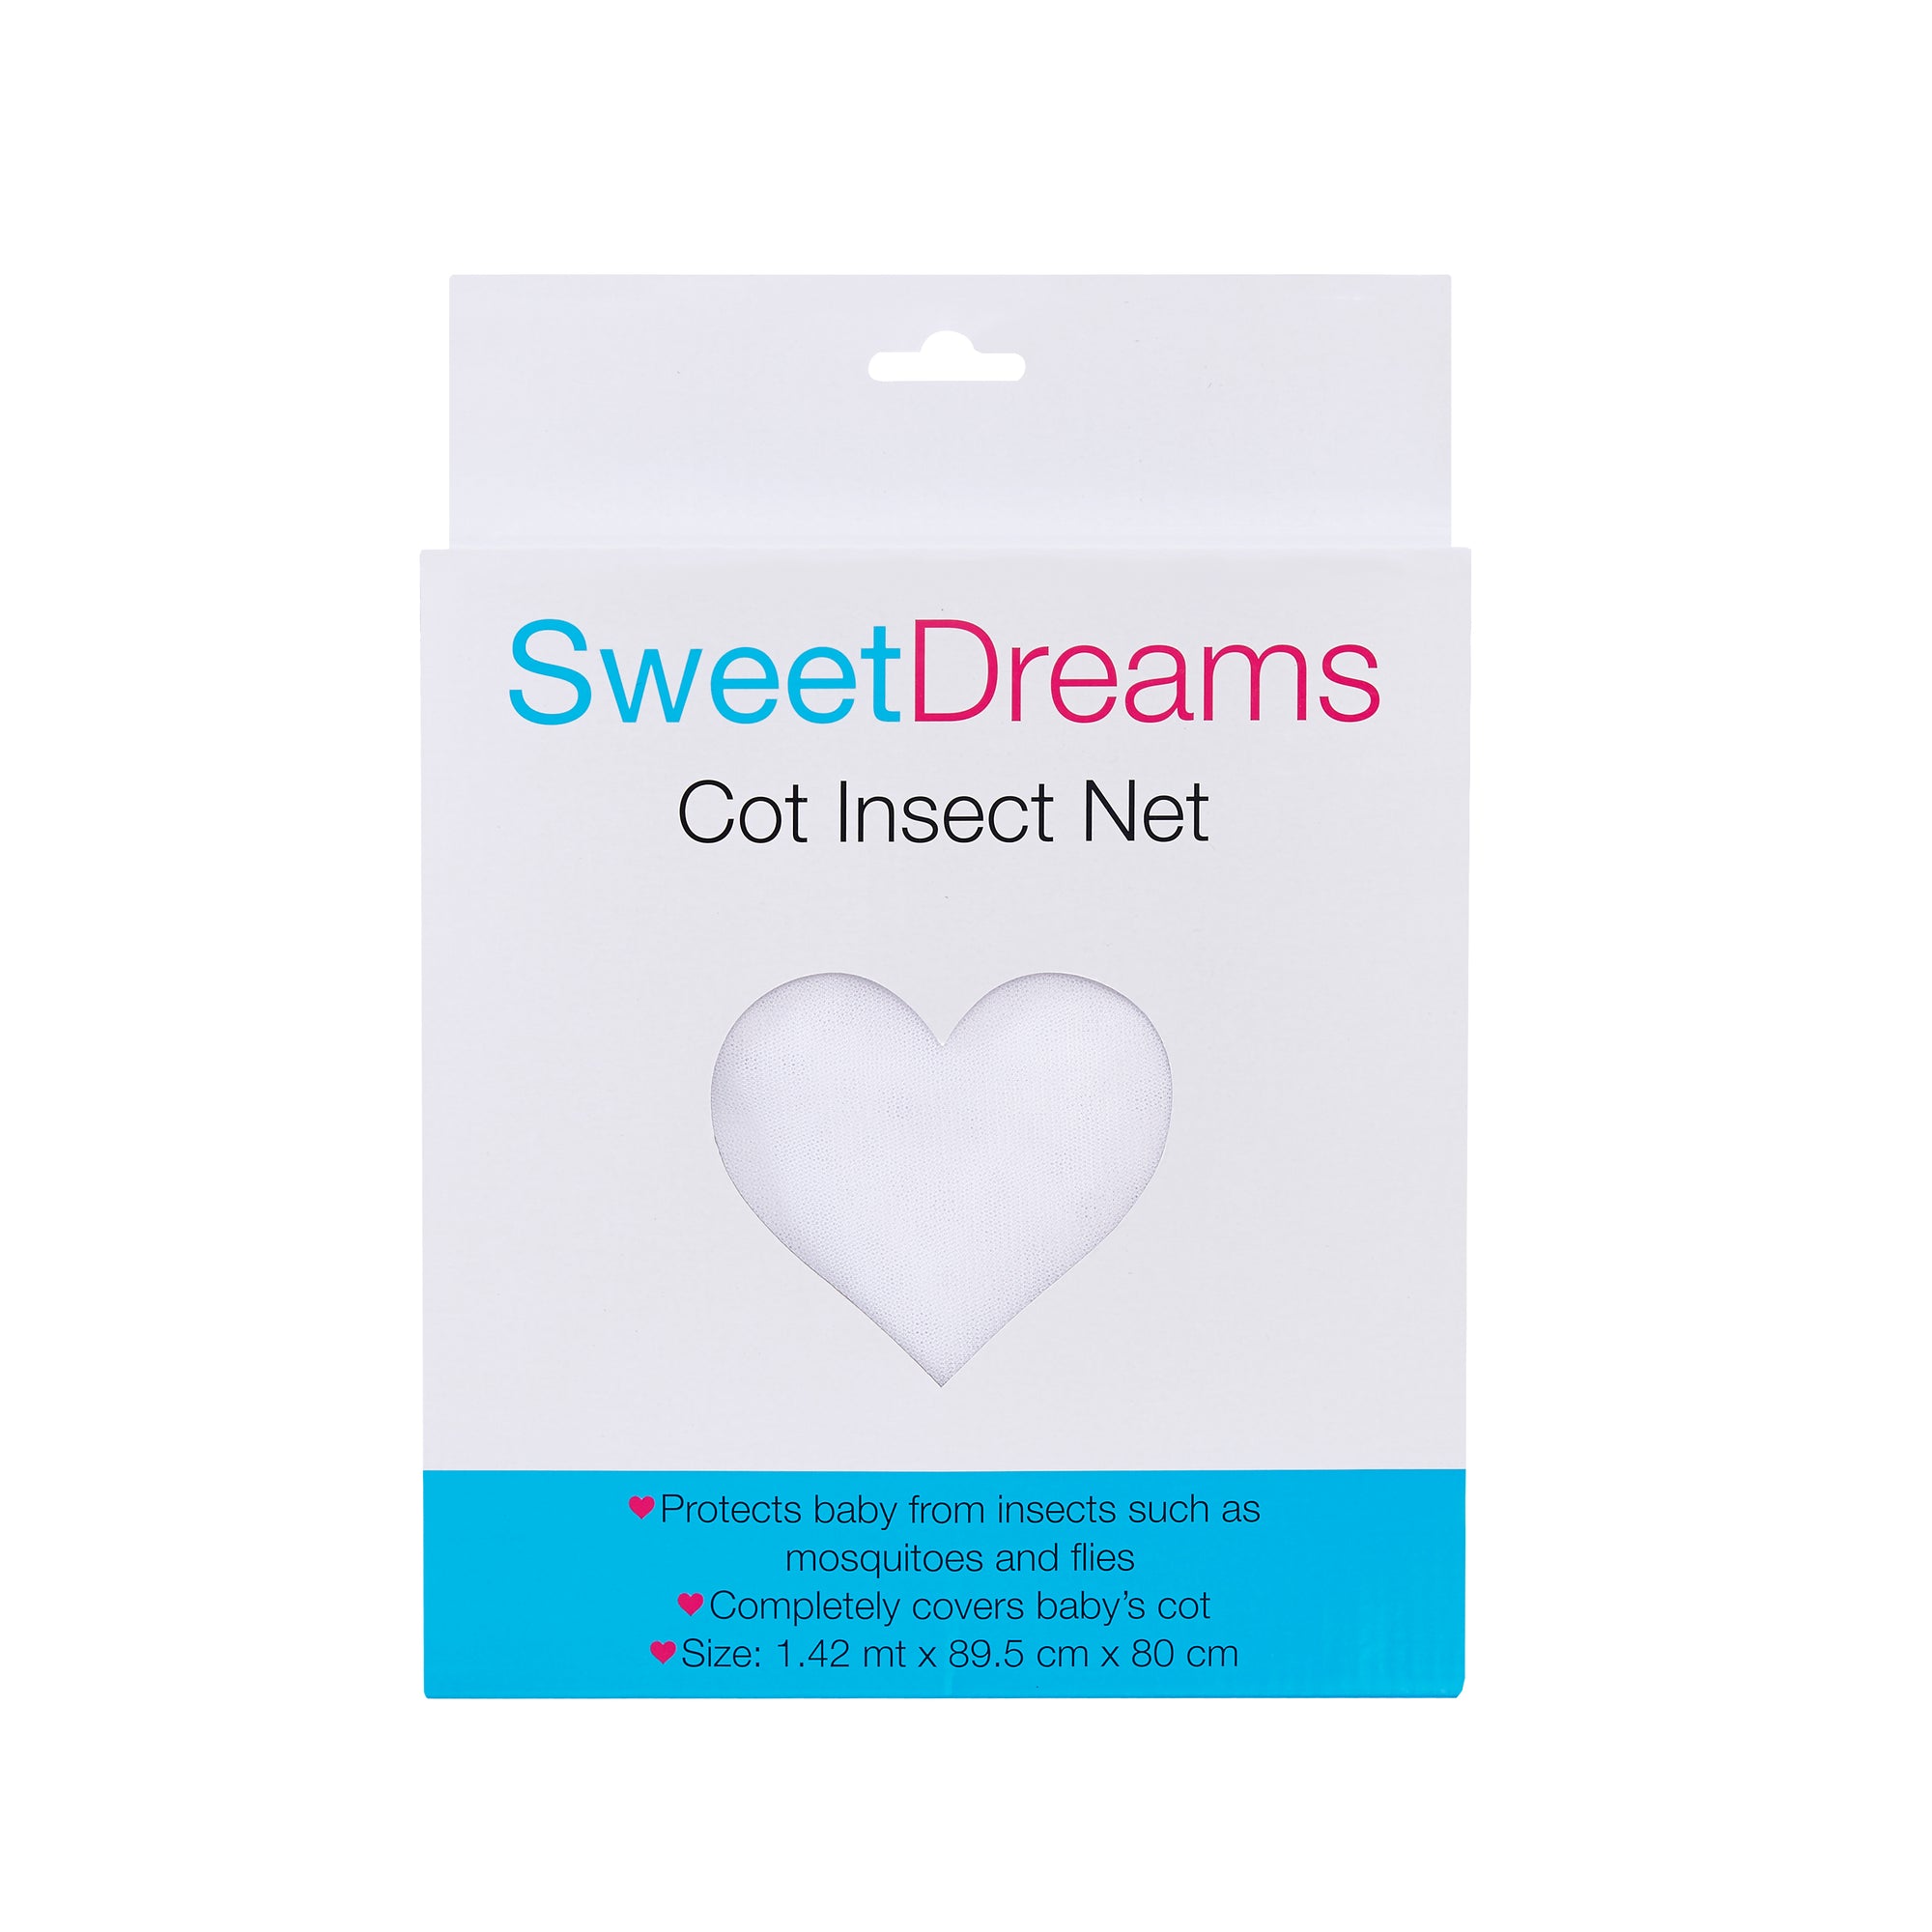 Sweet Dreams Cot Insect Net Boxed